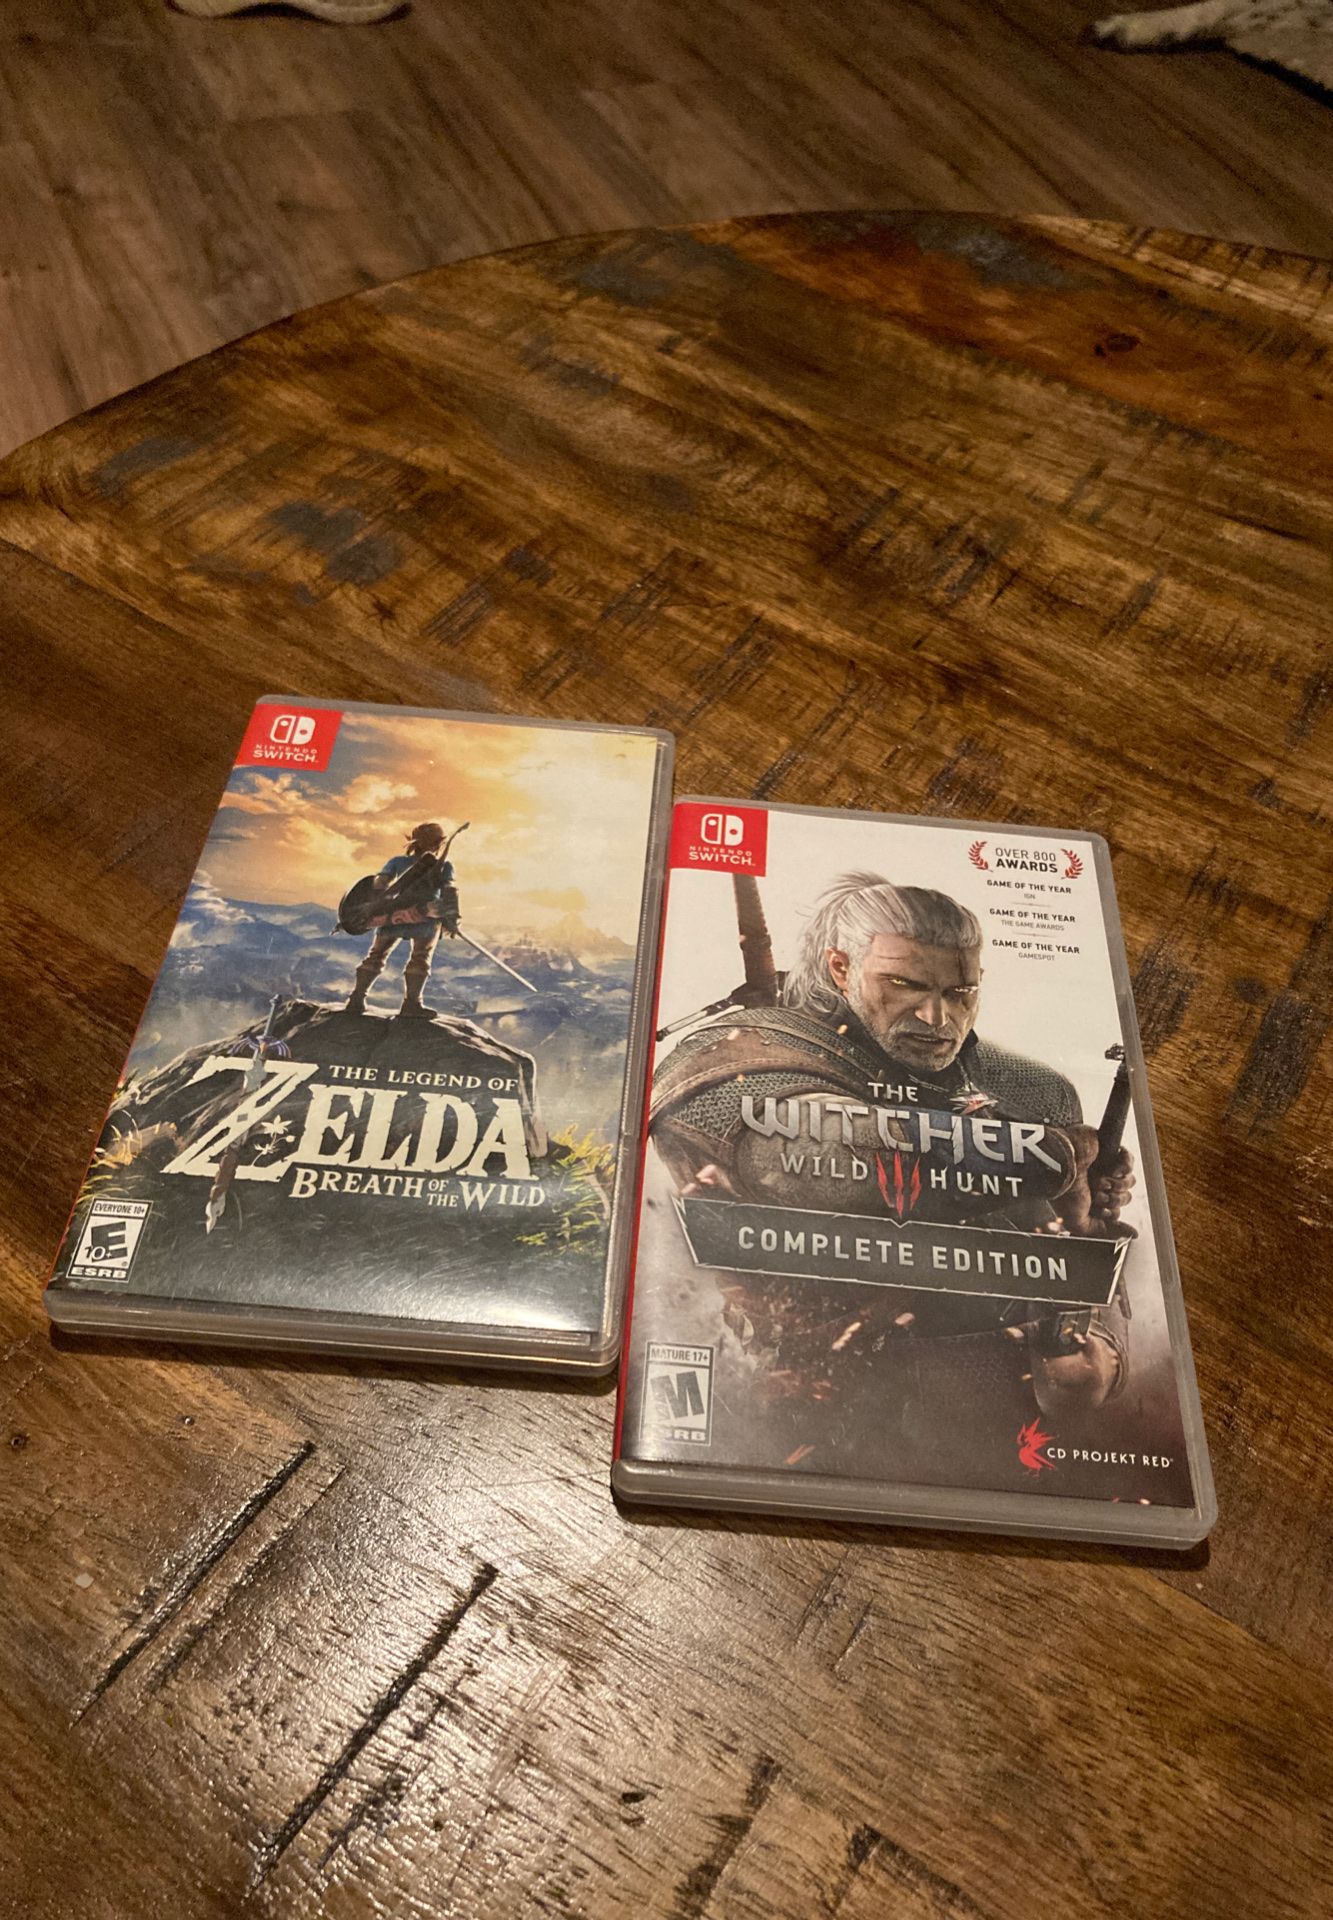 The Legend of Zelda Breath of The Wild & The Witcher 3 Wild Hunt Nintendo Switch Complete Edition